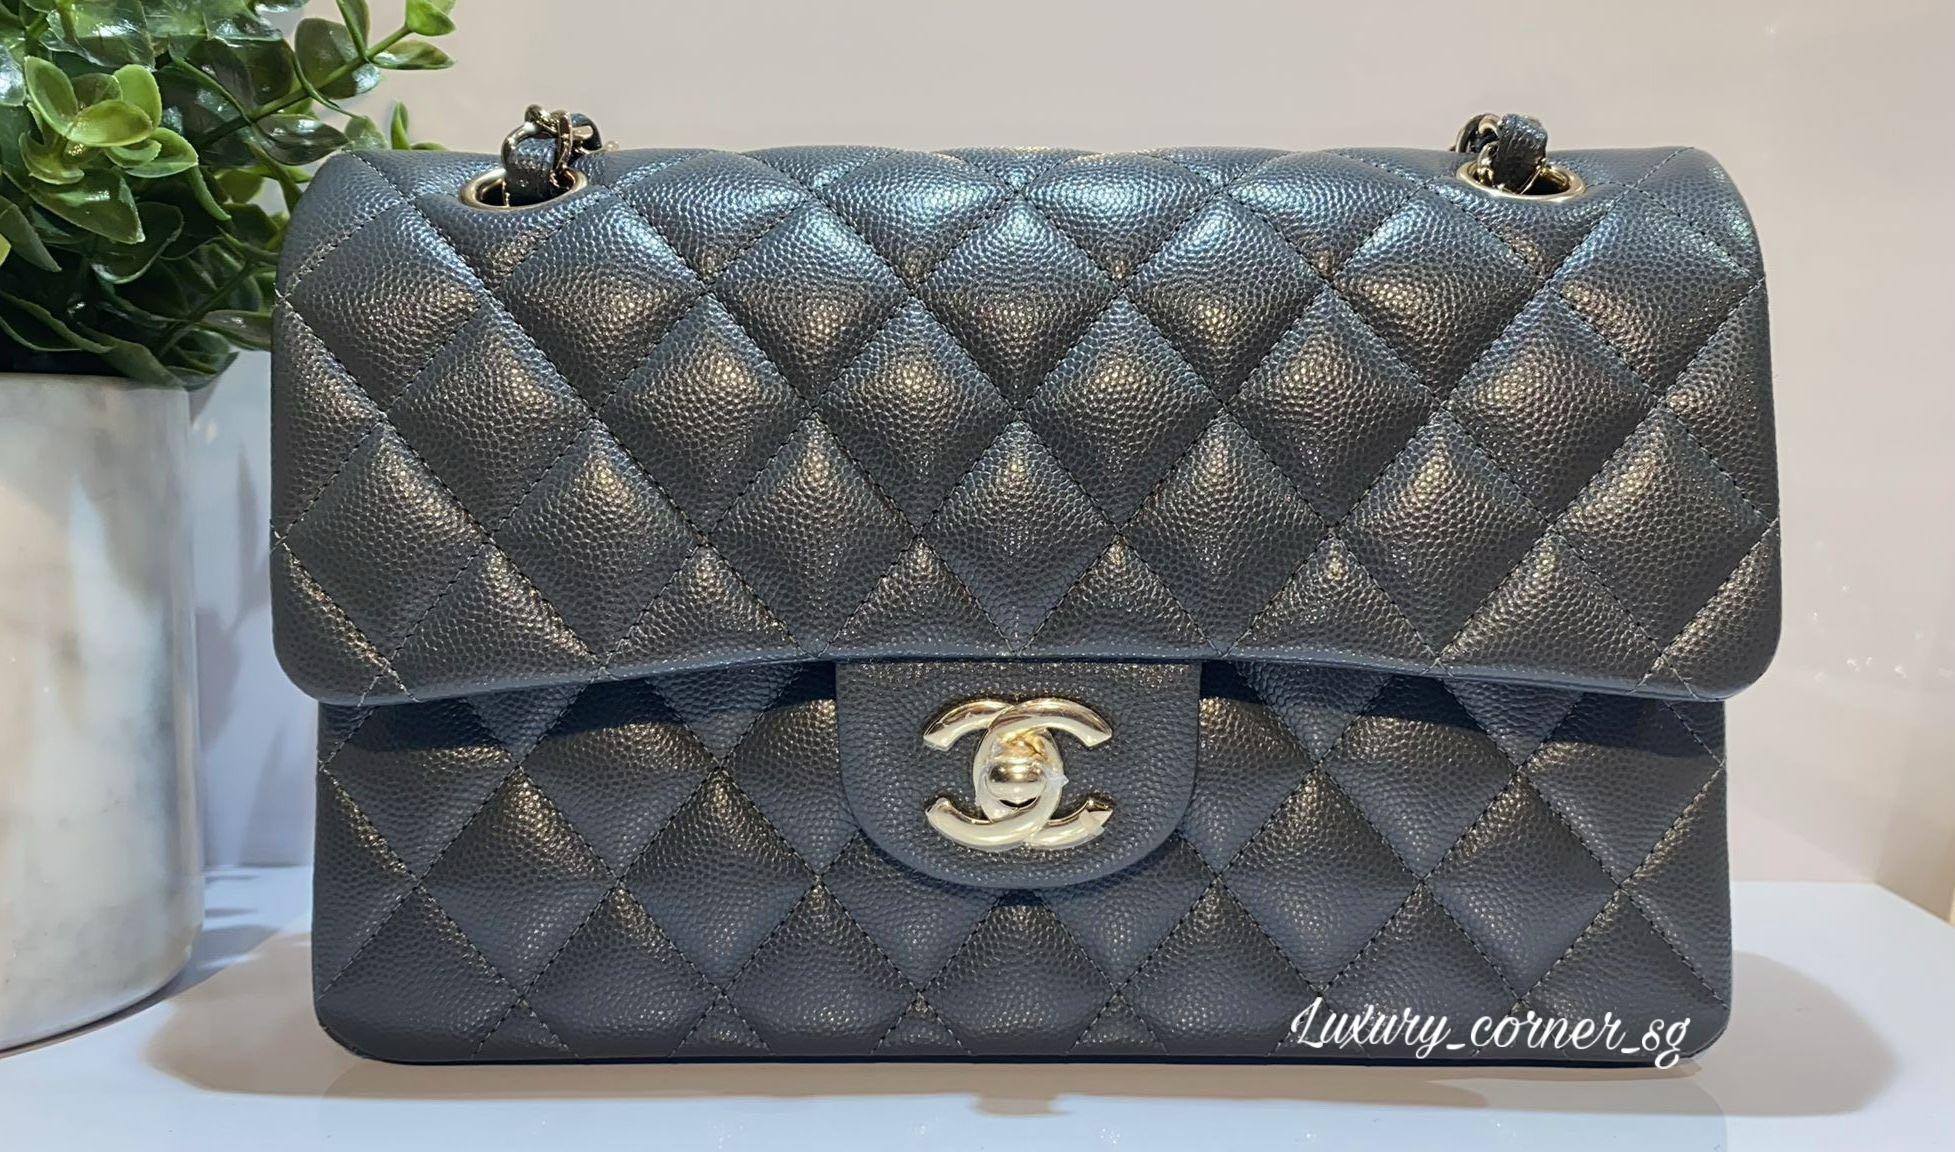 MUST WATCH BEFORE BUYING CHANEL! Quality Control Checklist, Avoid Defects &  Guide to Buying Preloved 